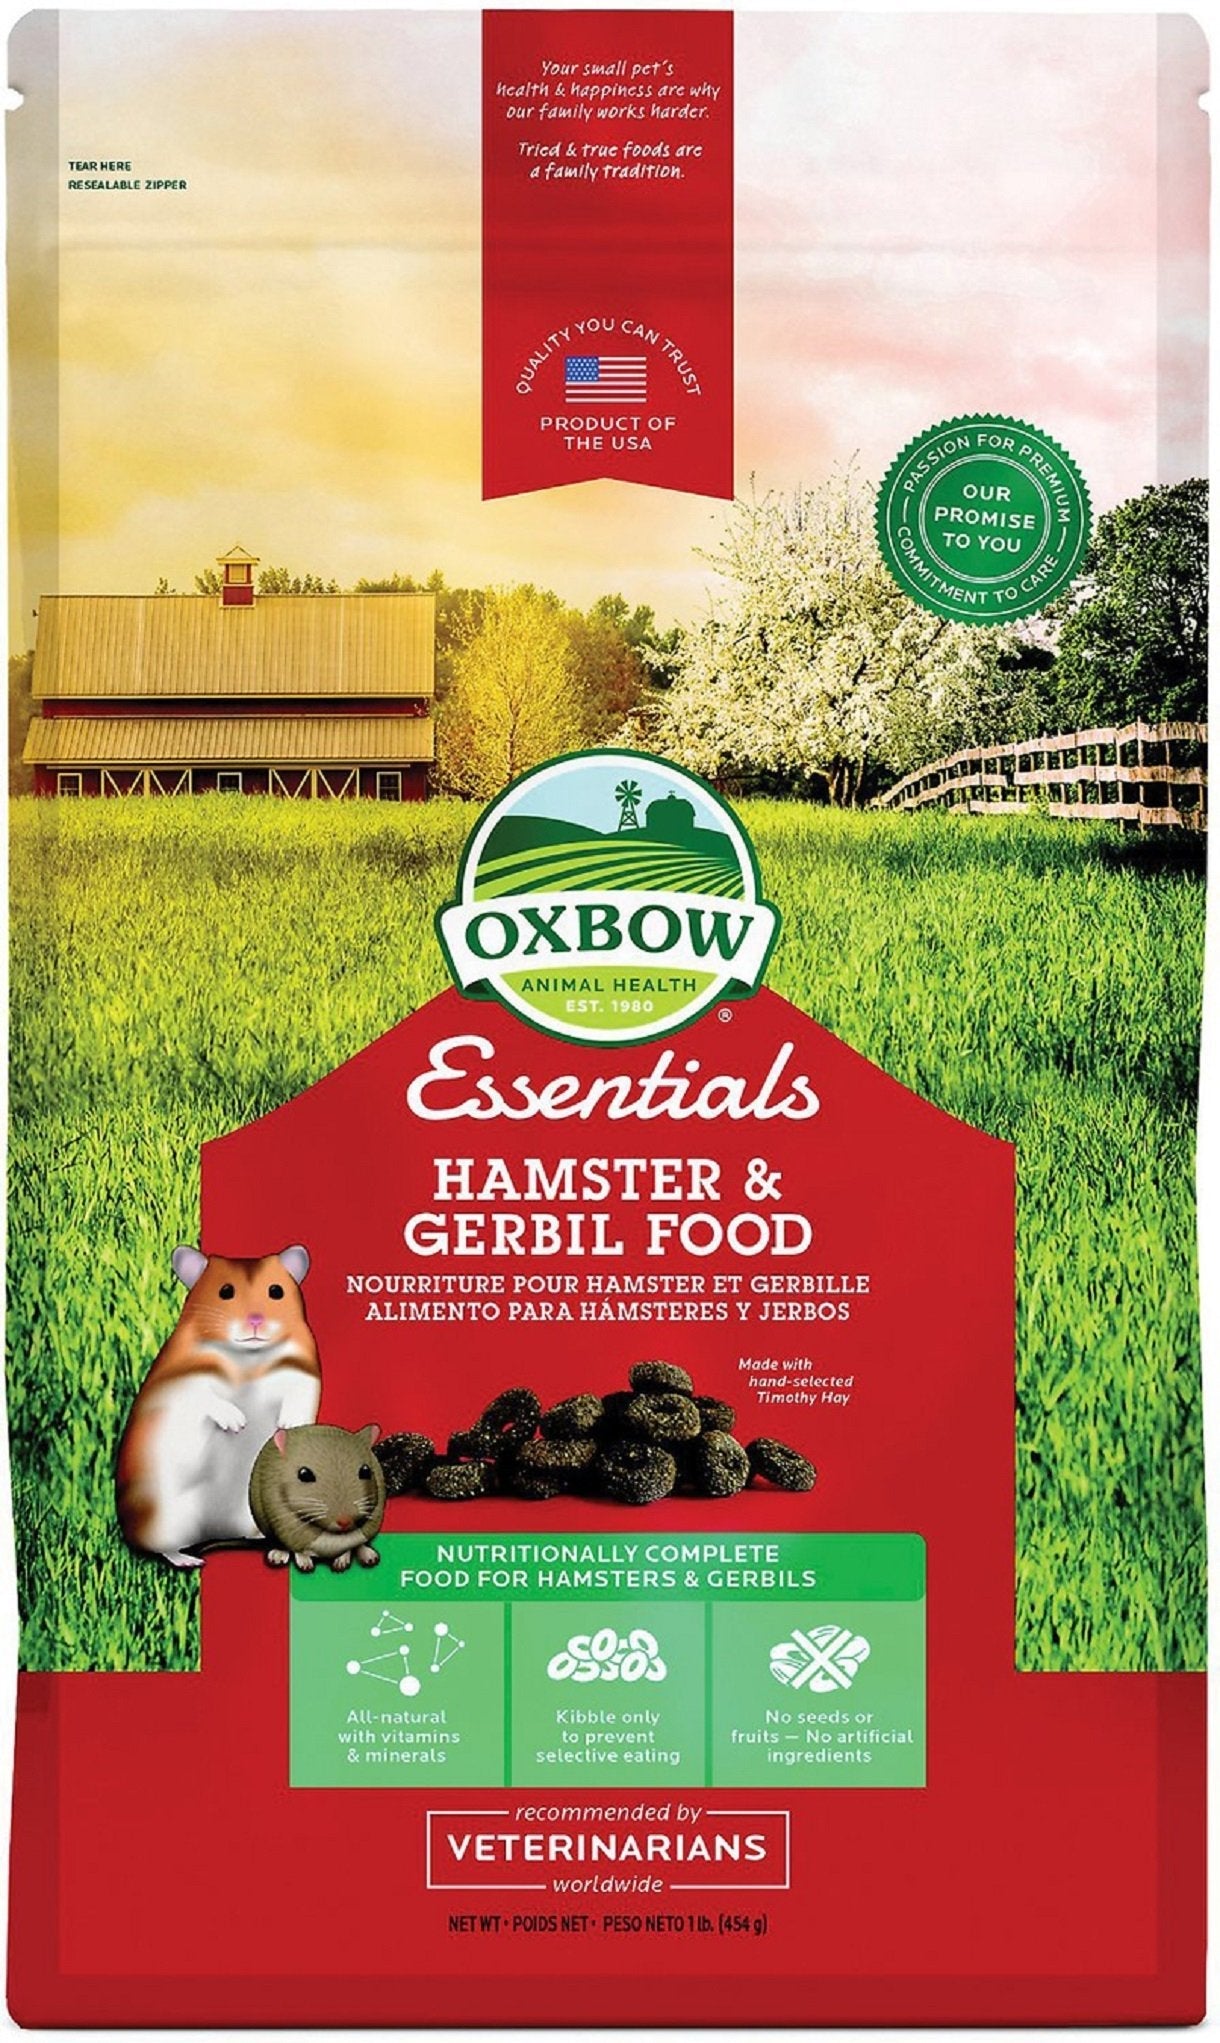 Oxbow, Pellets, Rodents, Rodents Food